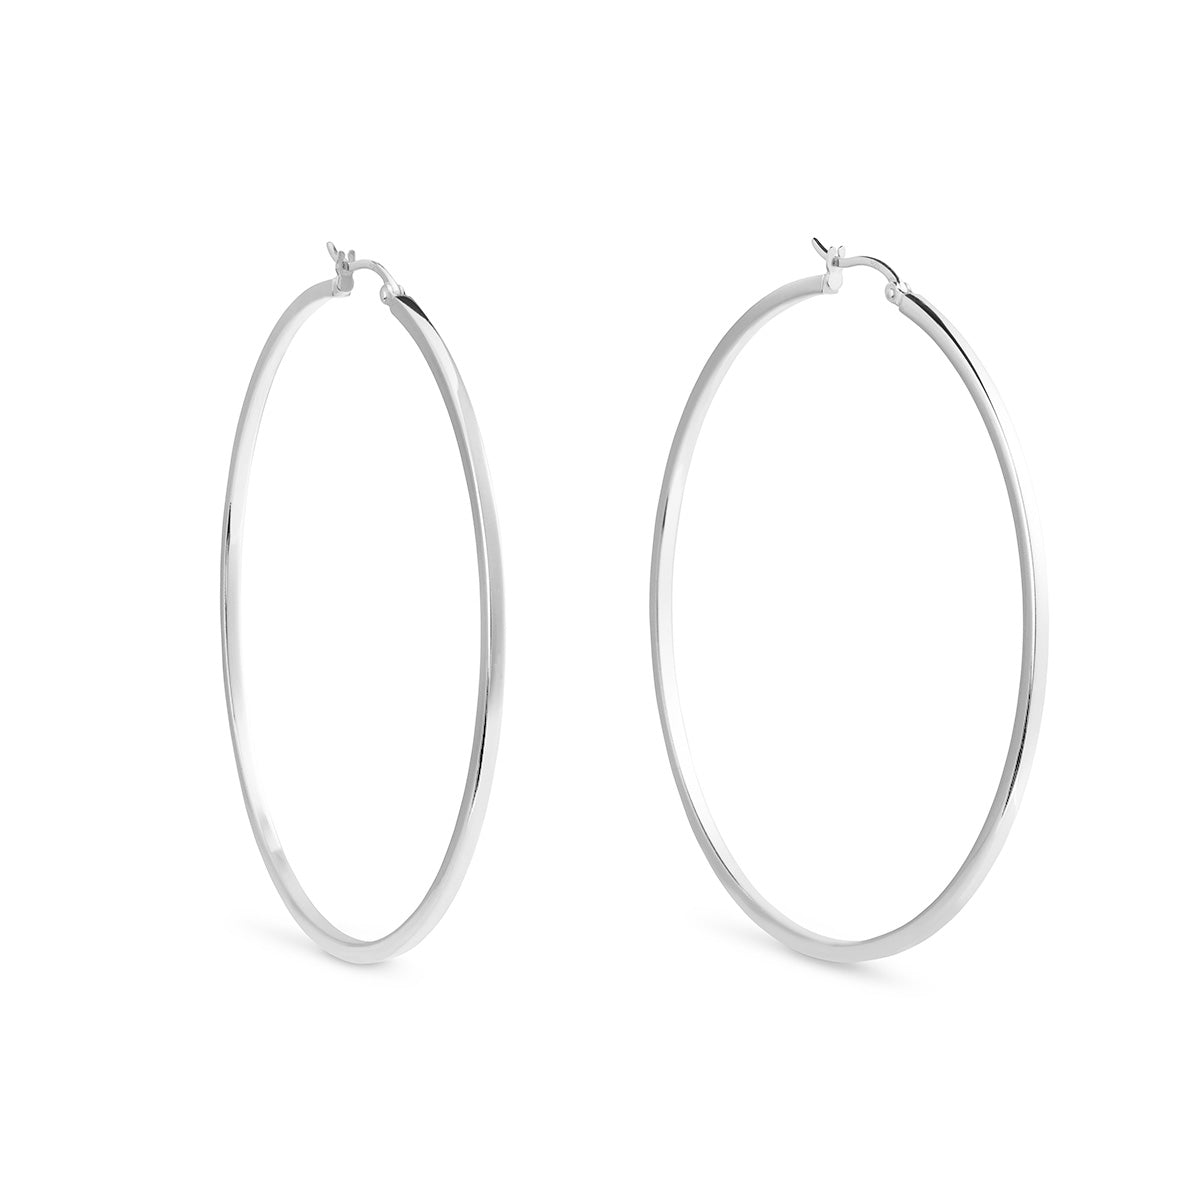 Sterling Silver Square Edged Hoop Earrings - Large | Hersey & Son Silversmiths